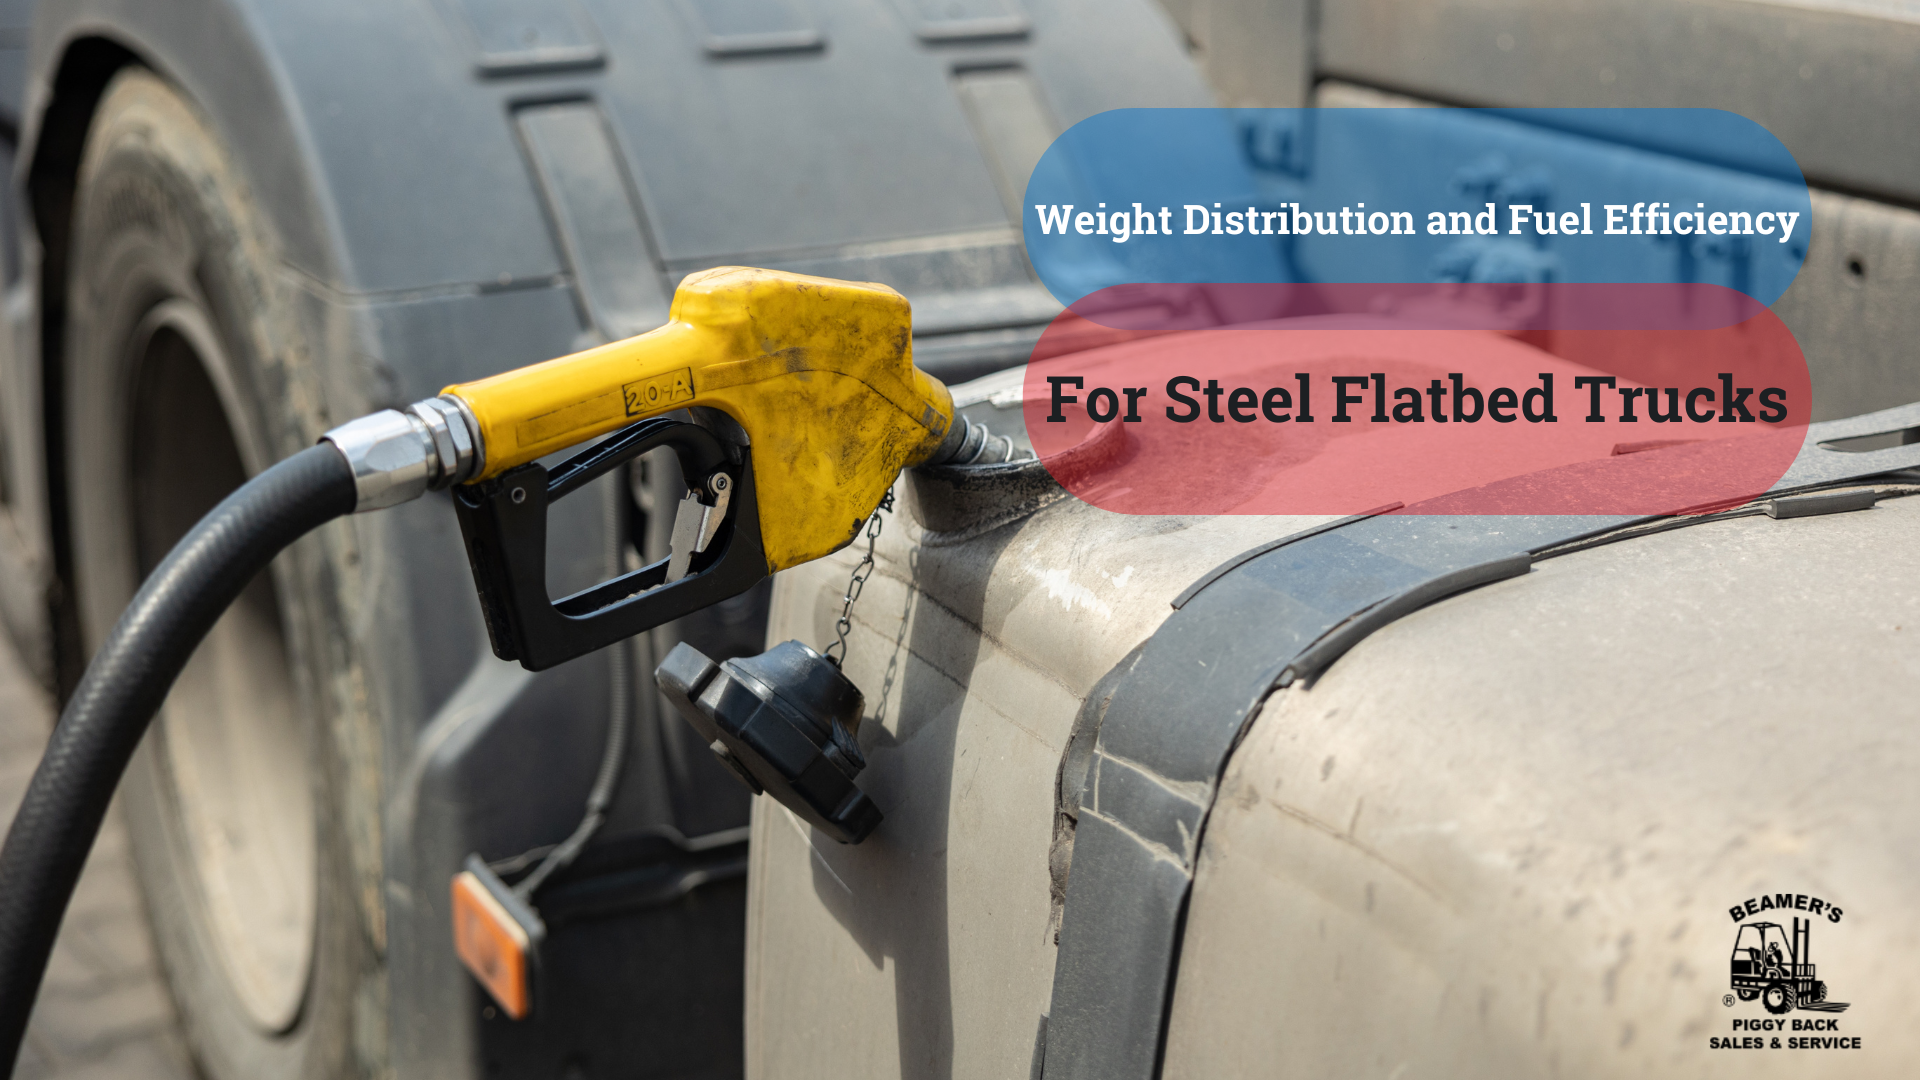 Weight Distribution and Fuel Efficiency for Flatbed Trucks